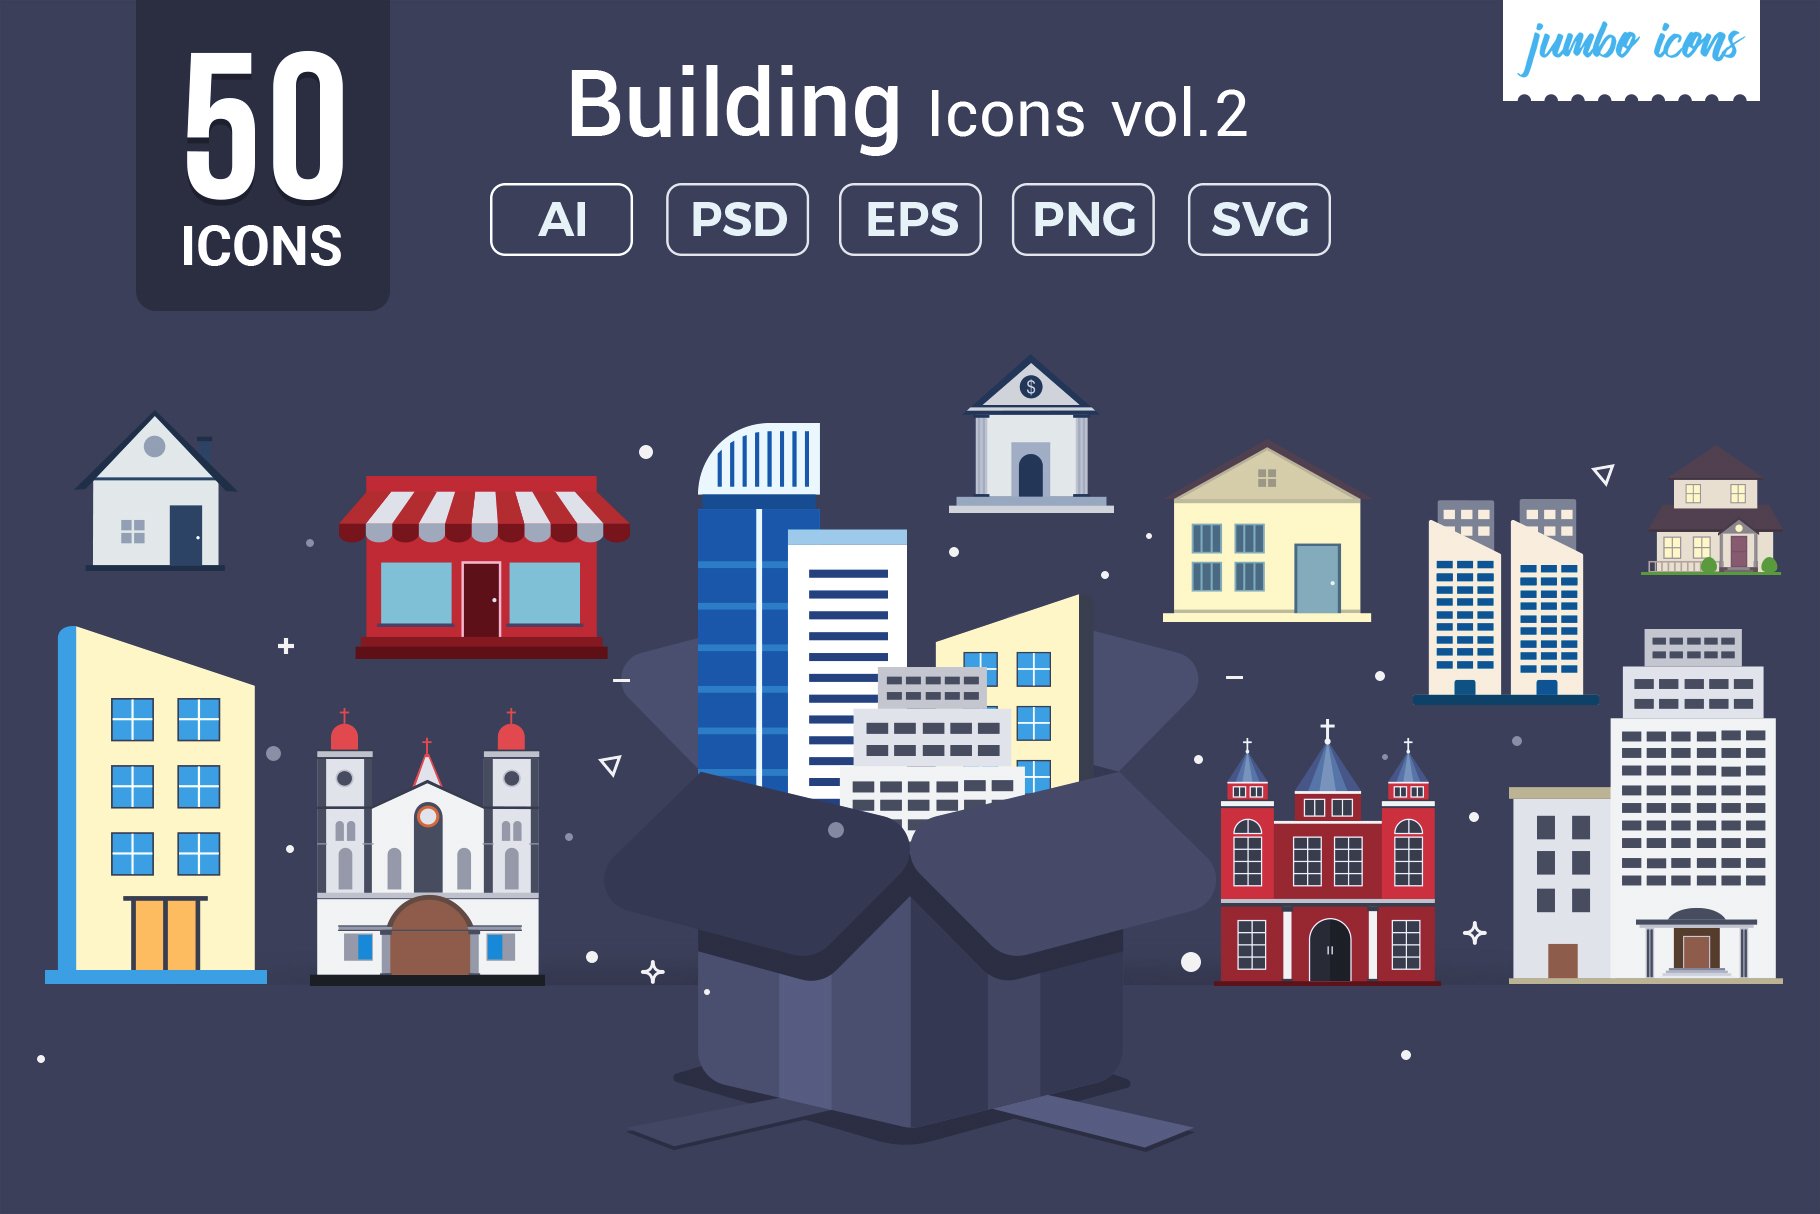 Buildings Vector Icons V2 cover image.